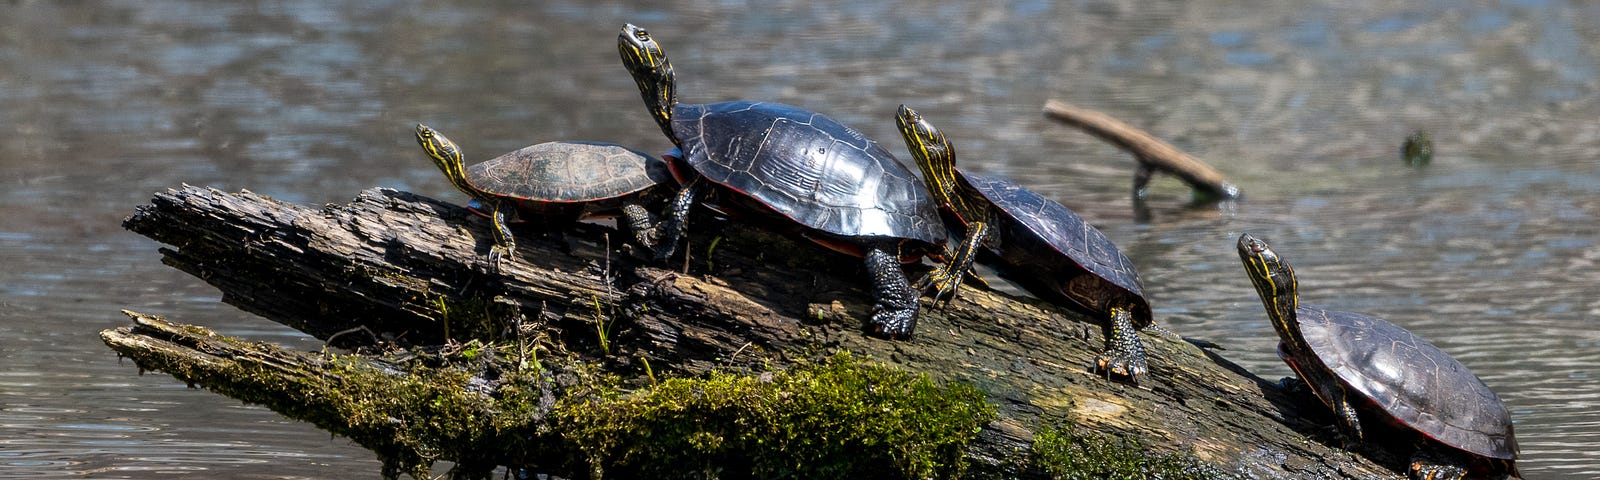 Painted turtles basking in the sun.